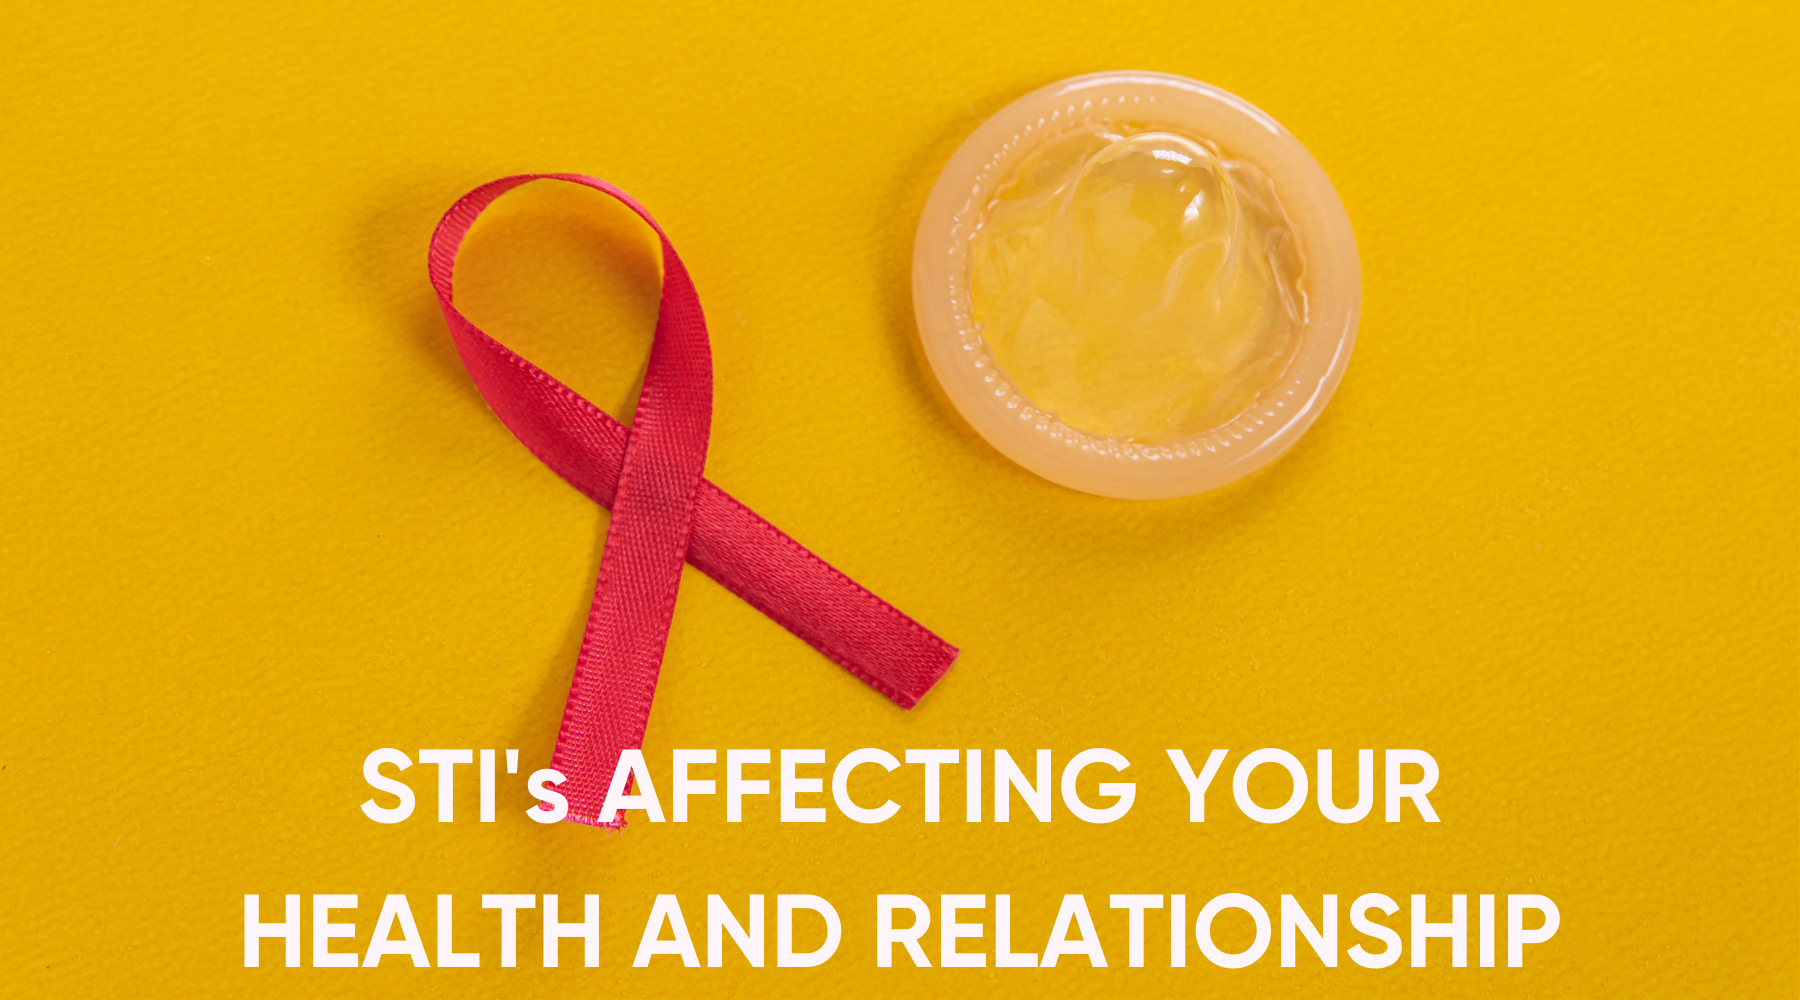 STI's AFFECTING YOUR HEALTH AND RELATIONSHIP